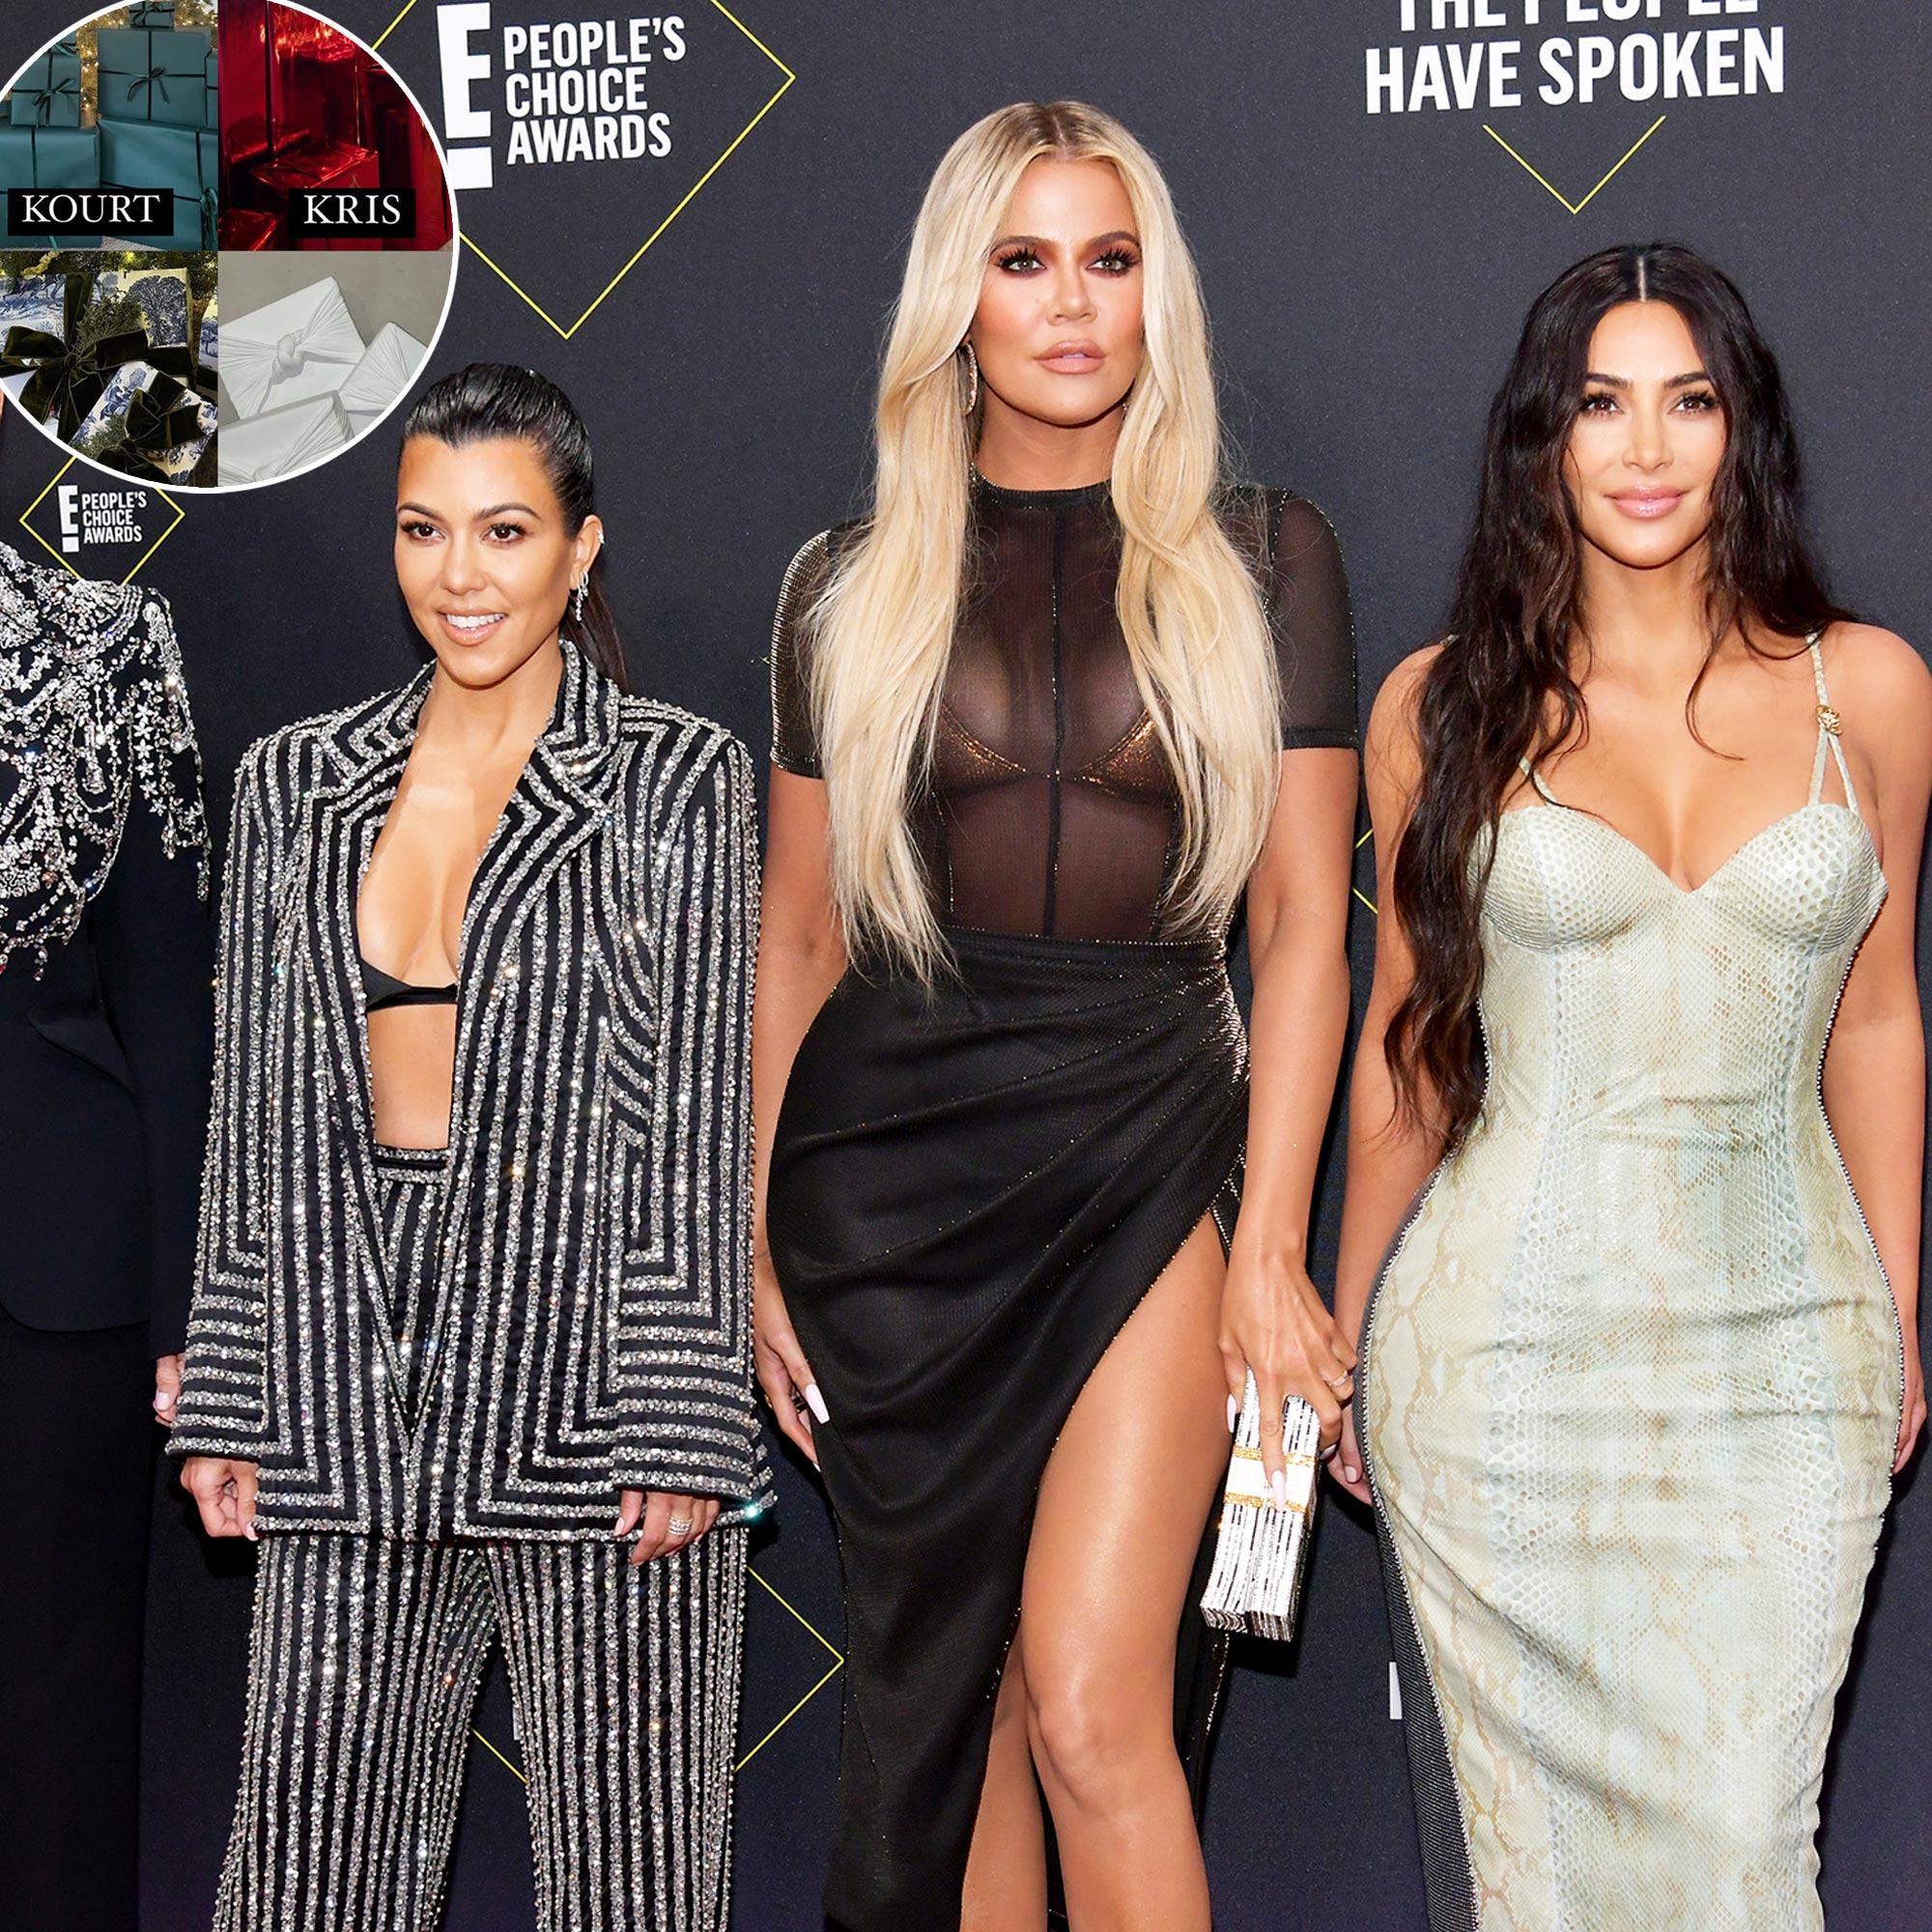 https://www.usmagazine.com/wp-content/uploads/2023/12/feature-Inside-the-Kardashian-Jenner-2023-Wrapping-Paper-1.jpg?quality=86&strip=all